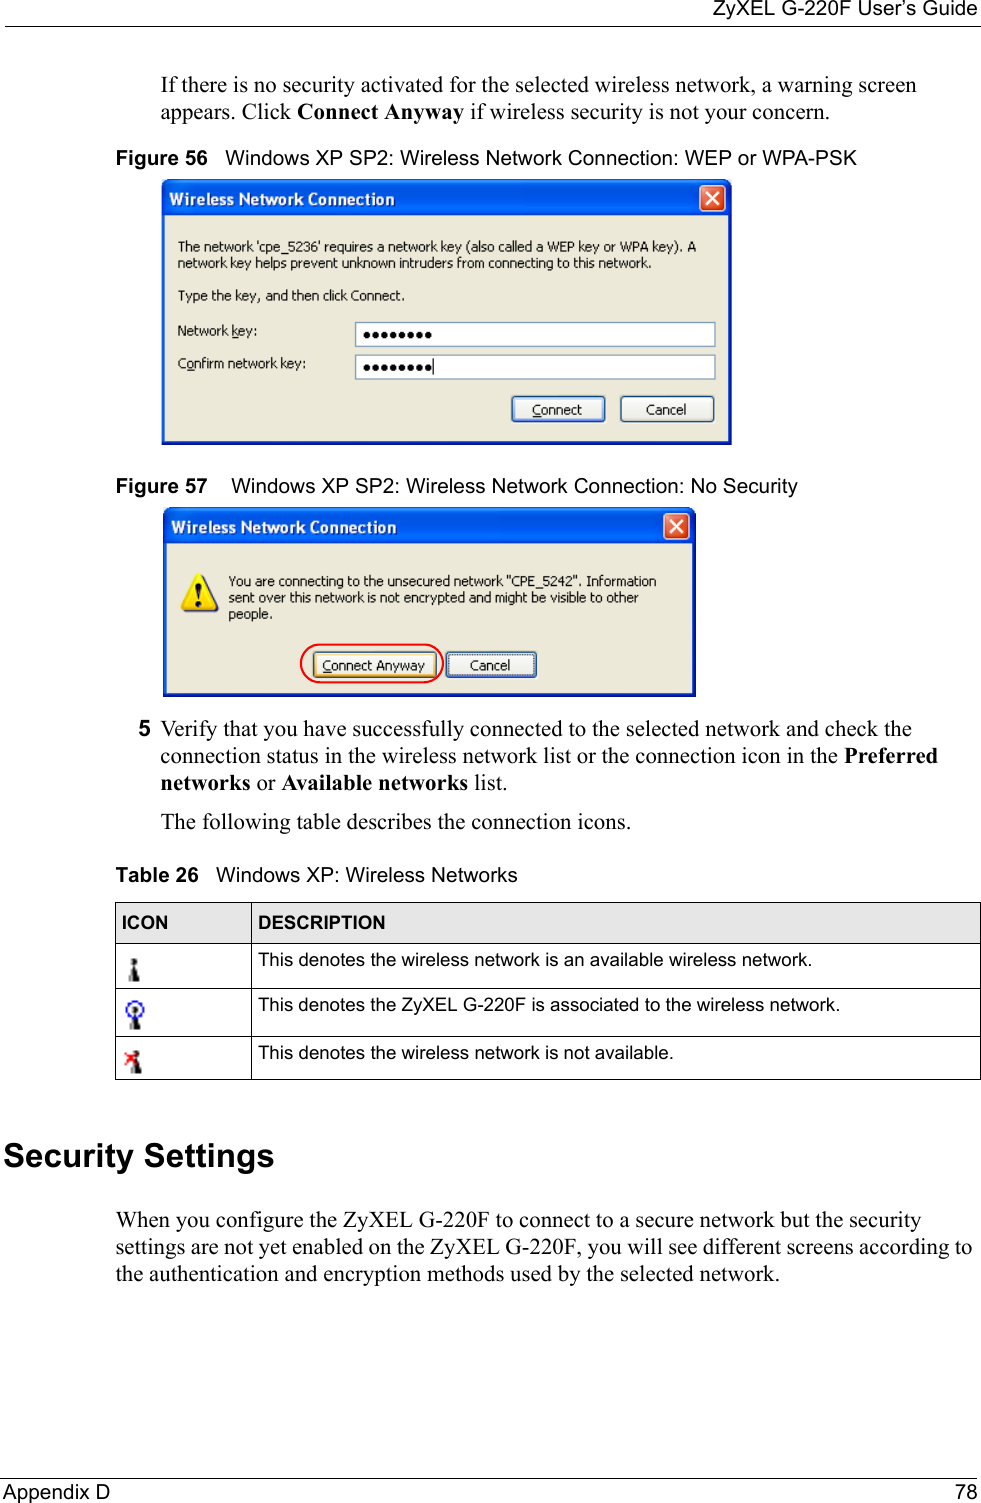 ZyXEL G-220F User’s GuideAppendix D  78If there is no security activated for the selected wireless network, a warning screen appears. Click Connect Anyway if wireless security is not your concern.Figure 56   Windows XP SP2: Wireless Network Connection: WEP or WPA-PSKFigure 57    Windows XP SP2: Wireless Network Connection: No Security5Verify that you have successfully connected to the selected network and check the connection status in the wireless network list or the connection icon in the Preferred networks or Available networks list.The following table describes the connection icons.Security SettingsWhen you configure the ZyXEL G-220F to connect to a secure network but the security settings are not yet enabled on the ZyXEL G-220F, you will see different screens according to the authentication and encryption methods used by the selected network.Table 26   Windows XP: Wireless NetworksICON DESCRIPTIONThis denotes the wireless network is an available wireless network.This denotes the ZyXEL G-220F is associated to the wireless network.This denotes the wireless network is not available.